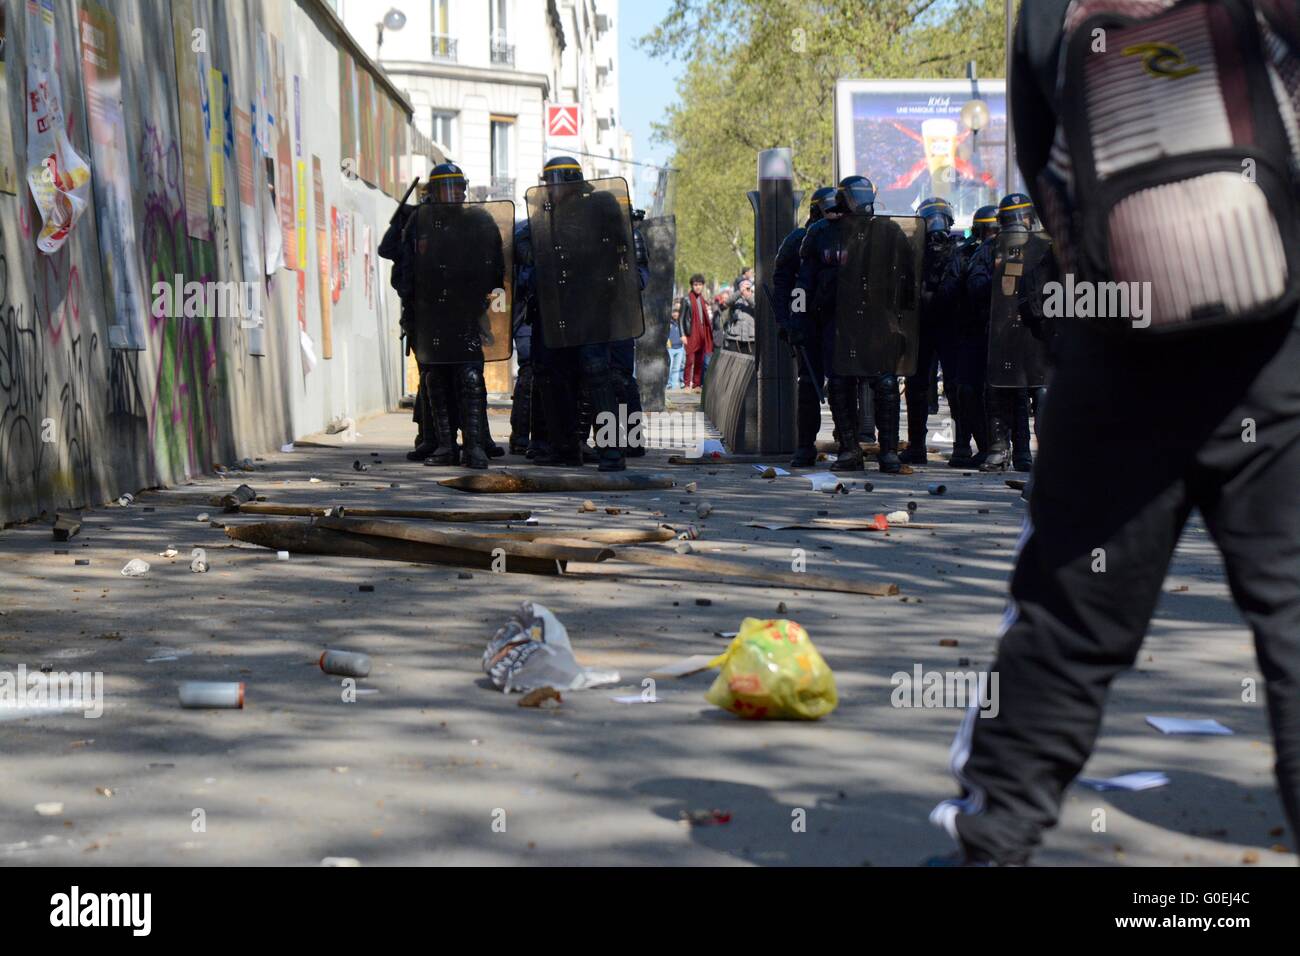 Paris, France. 1 May 2016. Slabs of concrete, teargas cannisters and blocks of wood litter the road after they were thrown at police. Credit: Marc Ward/Alamy Live News Stock Photo